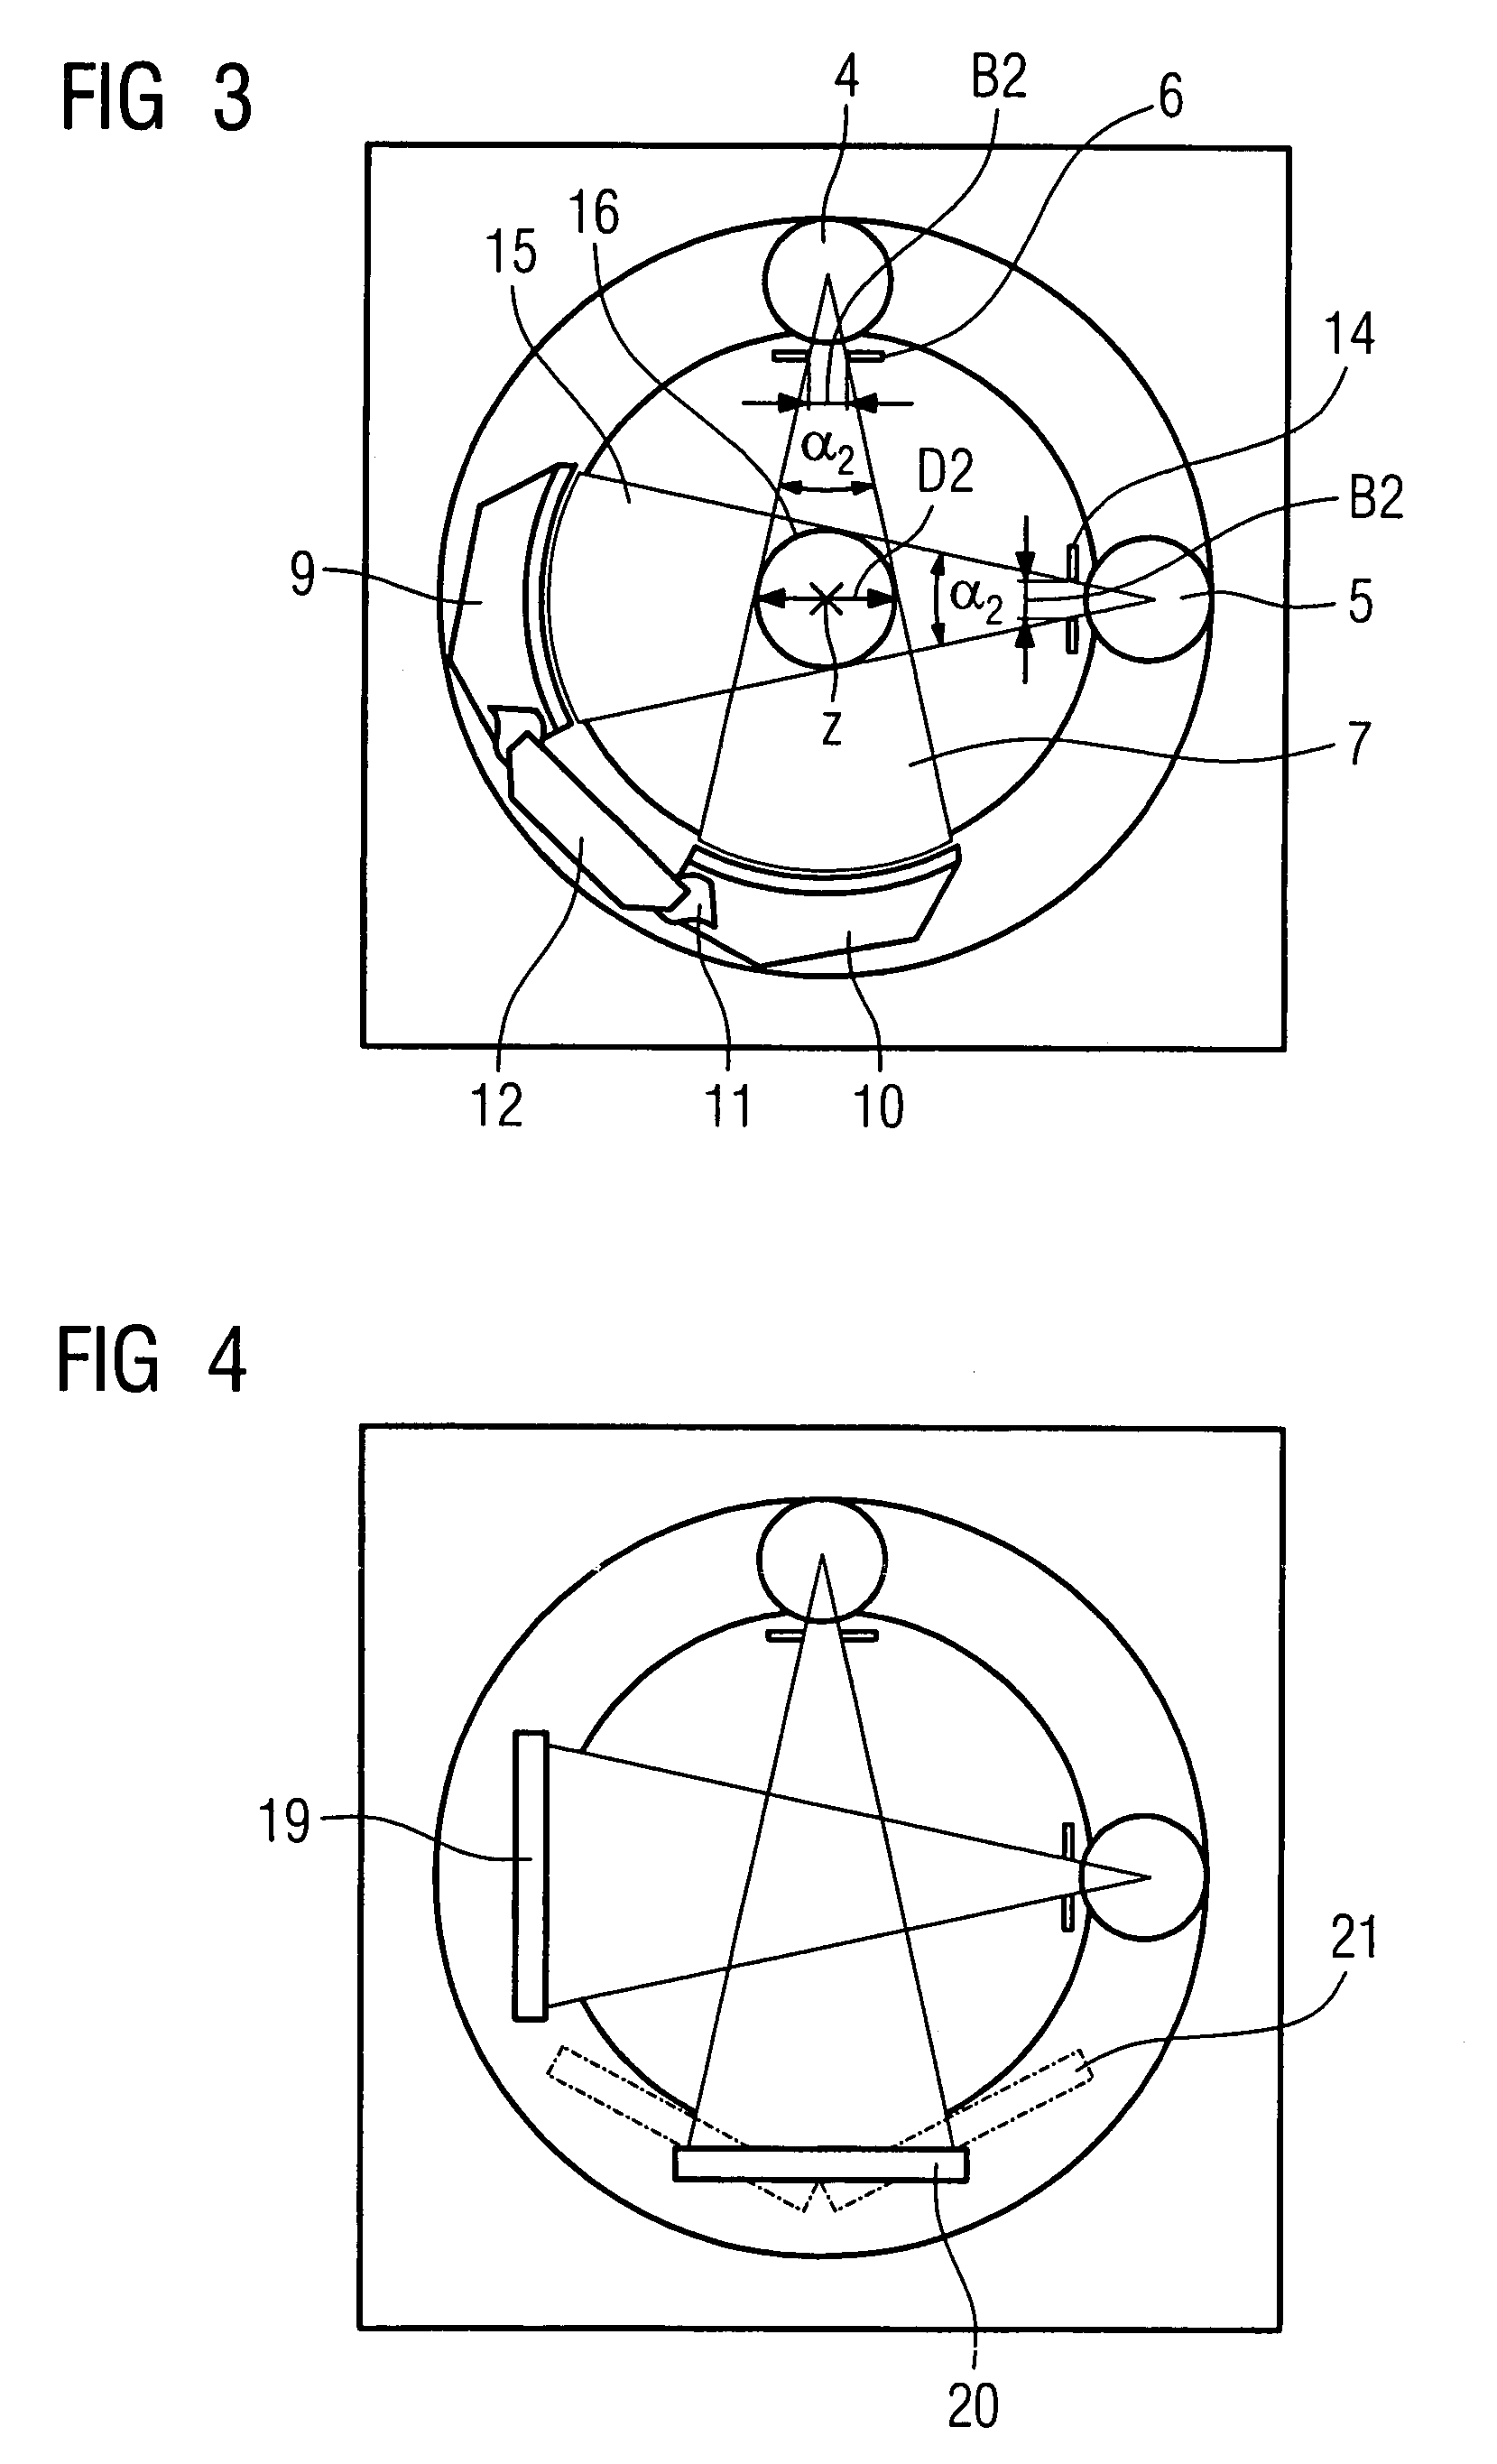 Imaging tomography apparatus with multiple operating modes